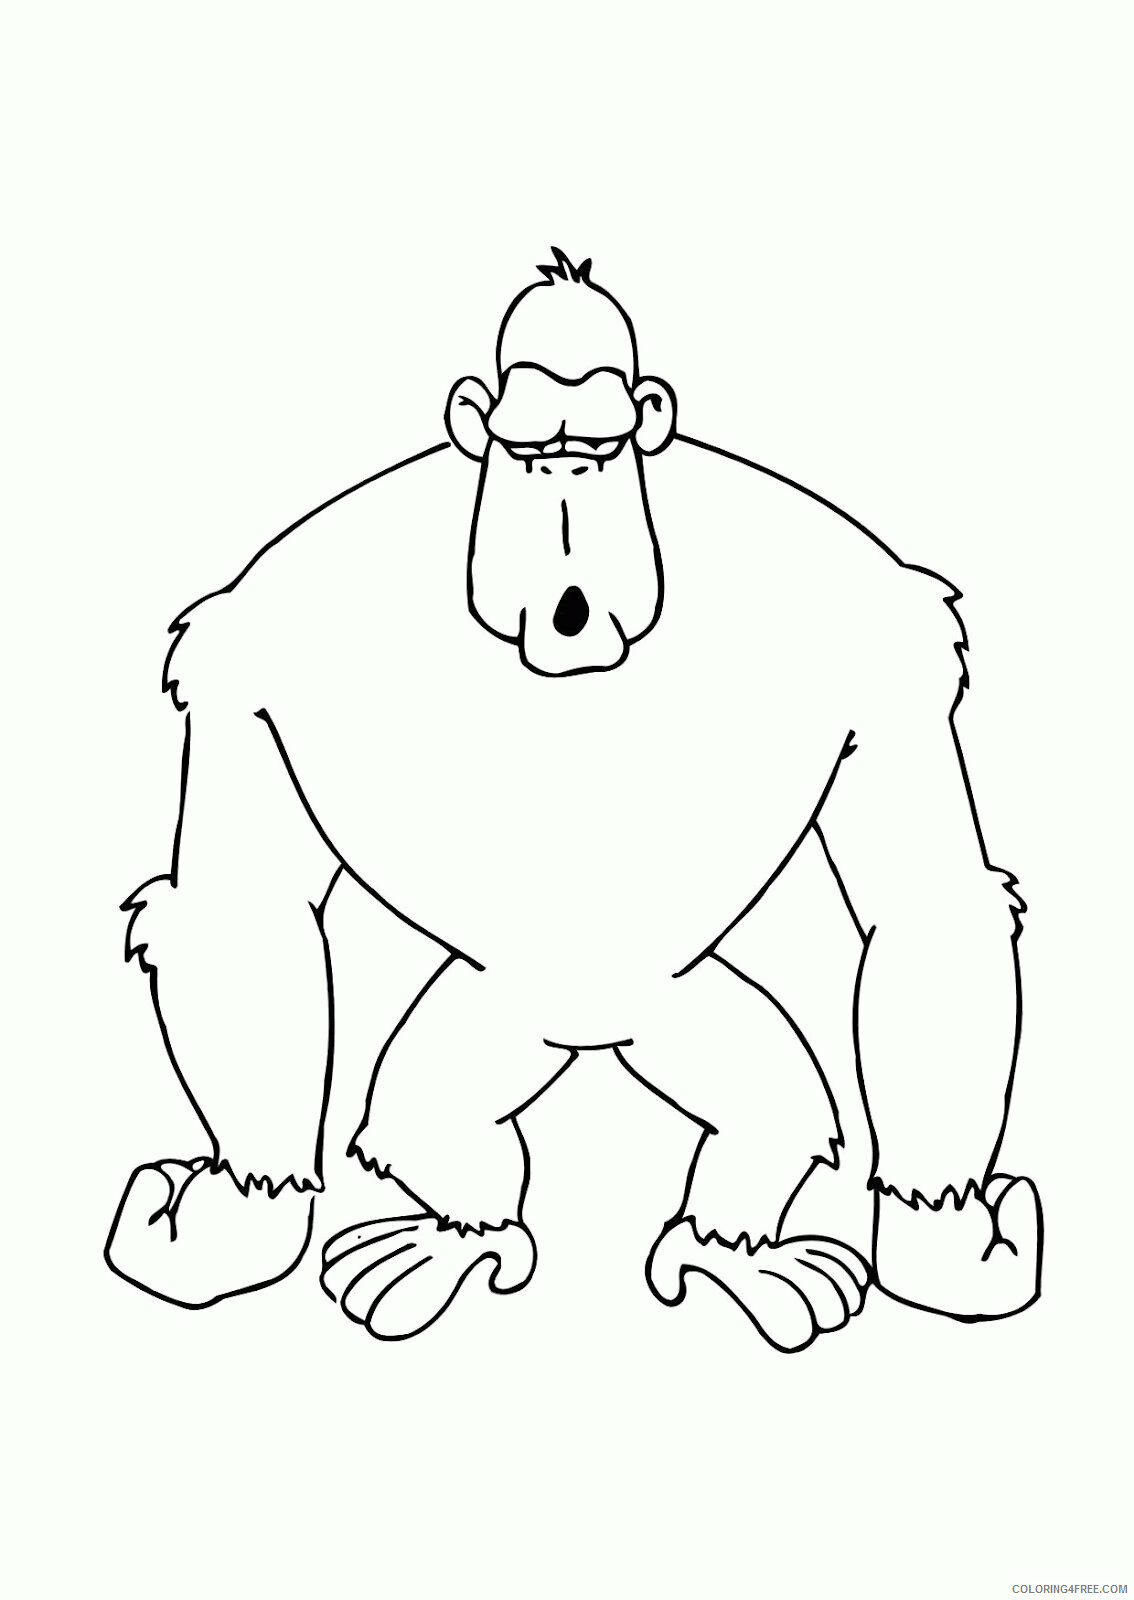 Gorilla Coloring Sheets Animal Coloring Pages Printable 2021 2136 Coloring4free